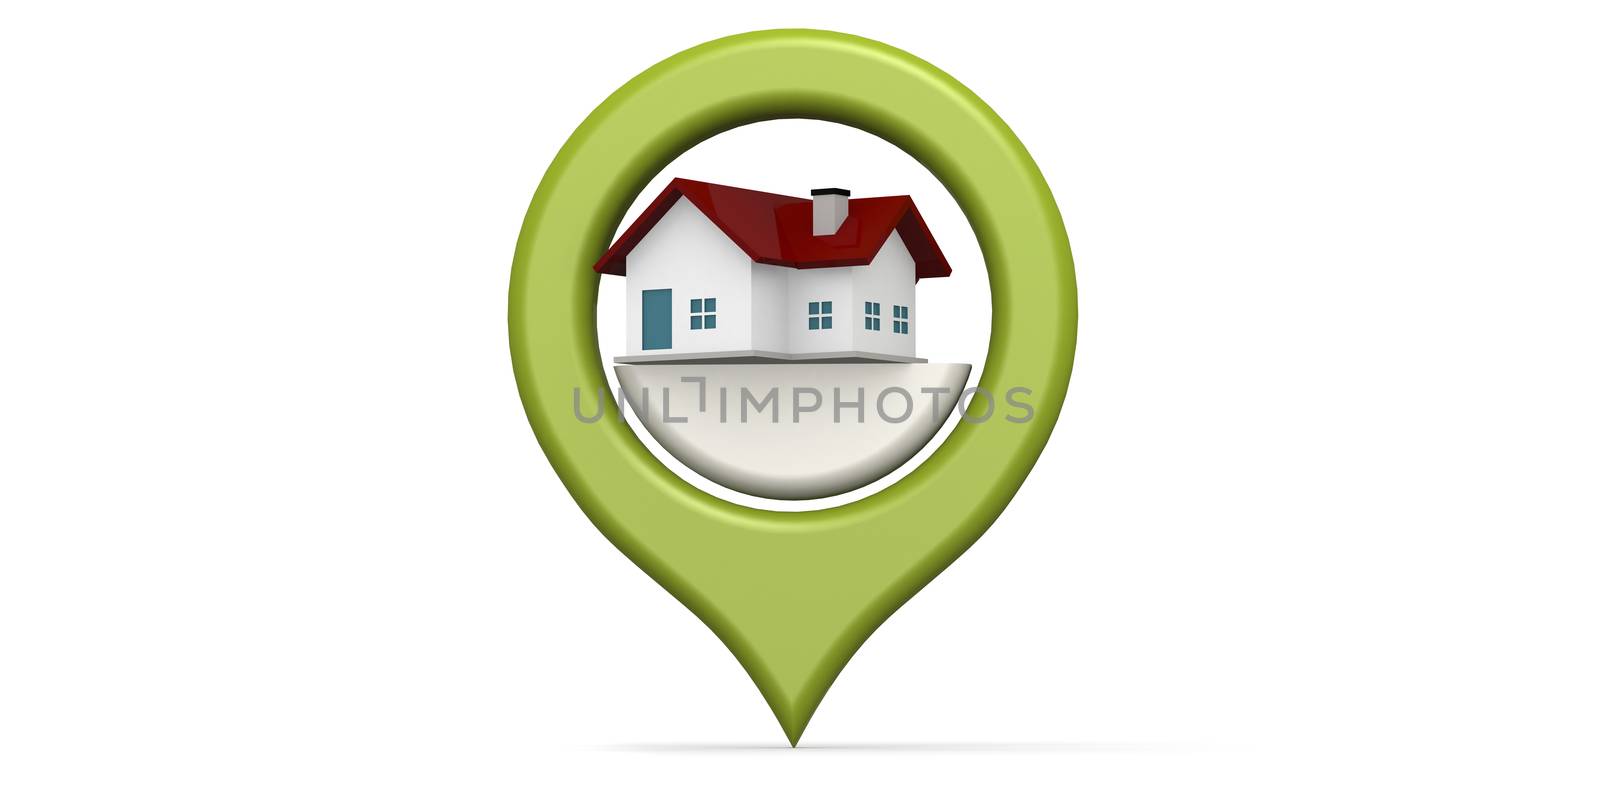 Green house icon locator isolated, 3D rendering